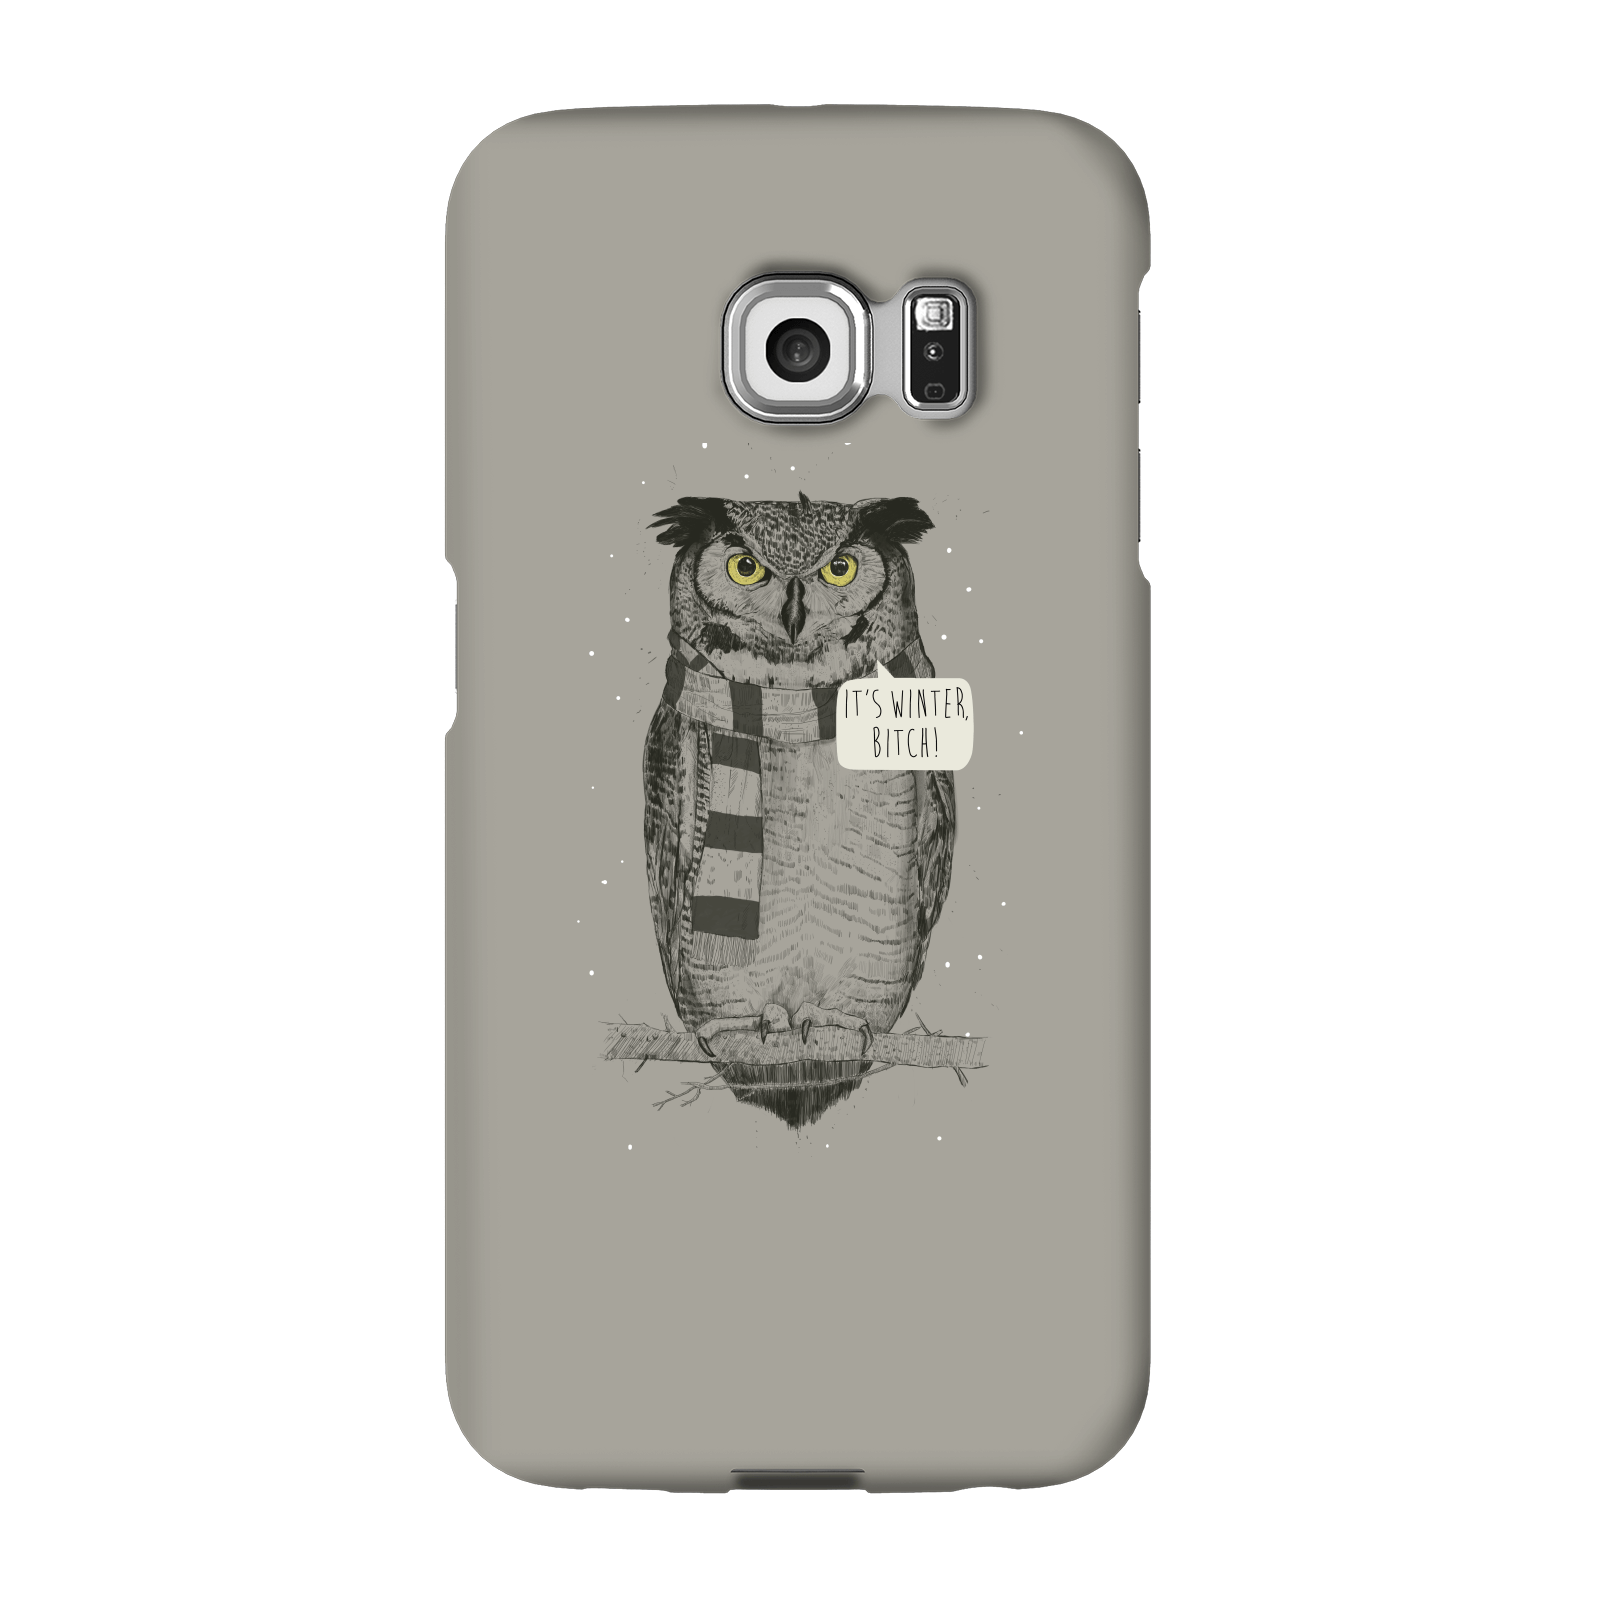 balazs solti it's winter, bitch! phone case for iphone and android - samsung s6 edge - snap case - matte